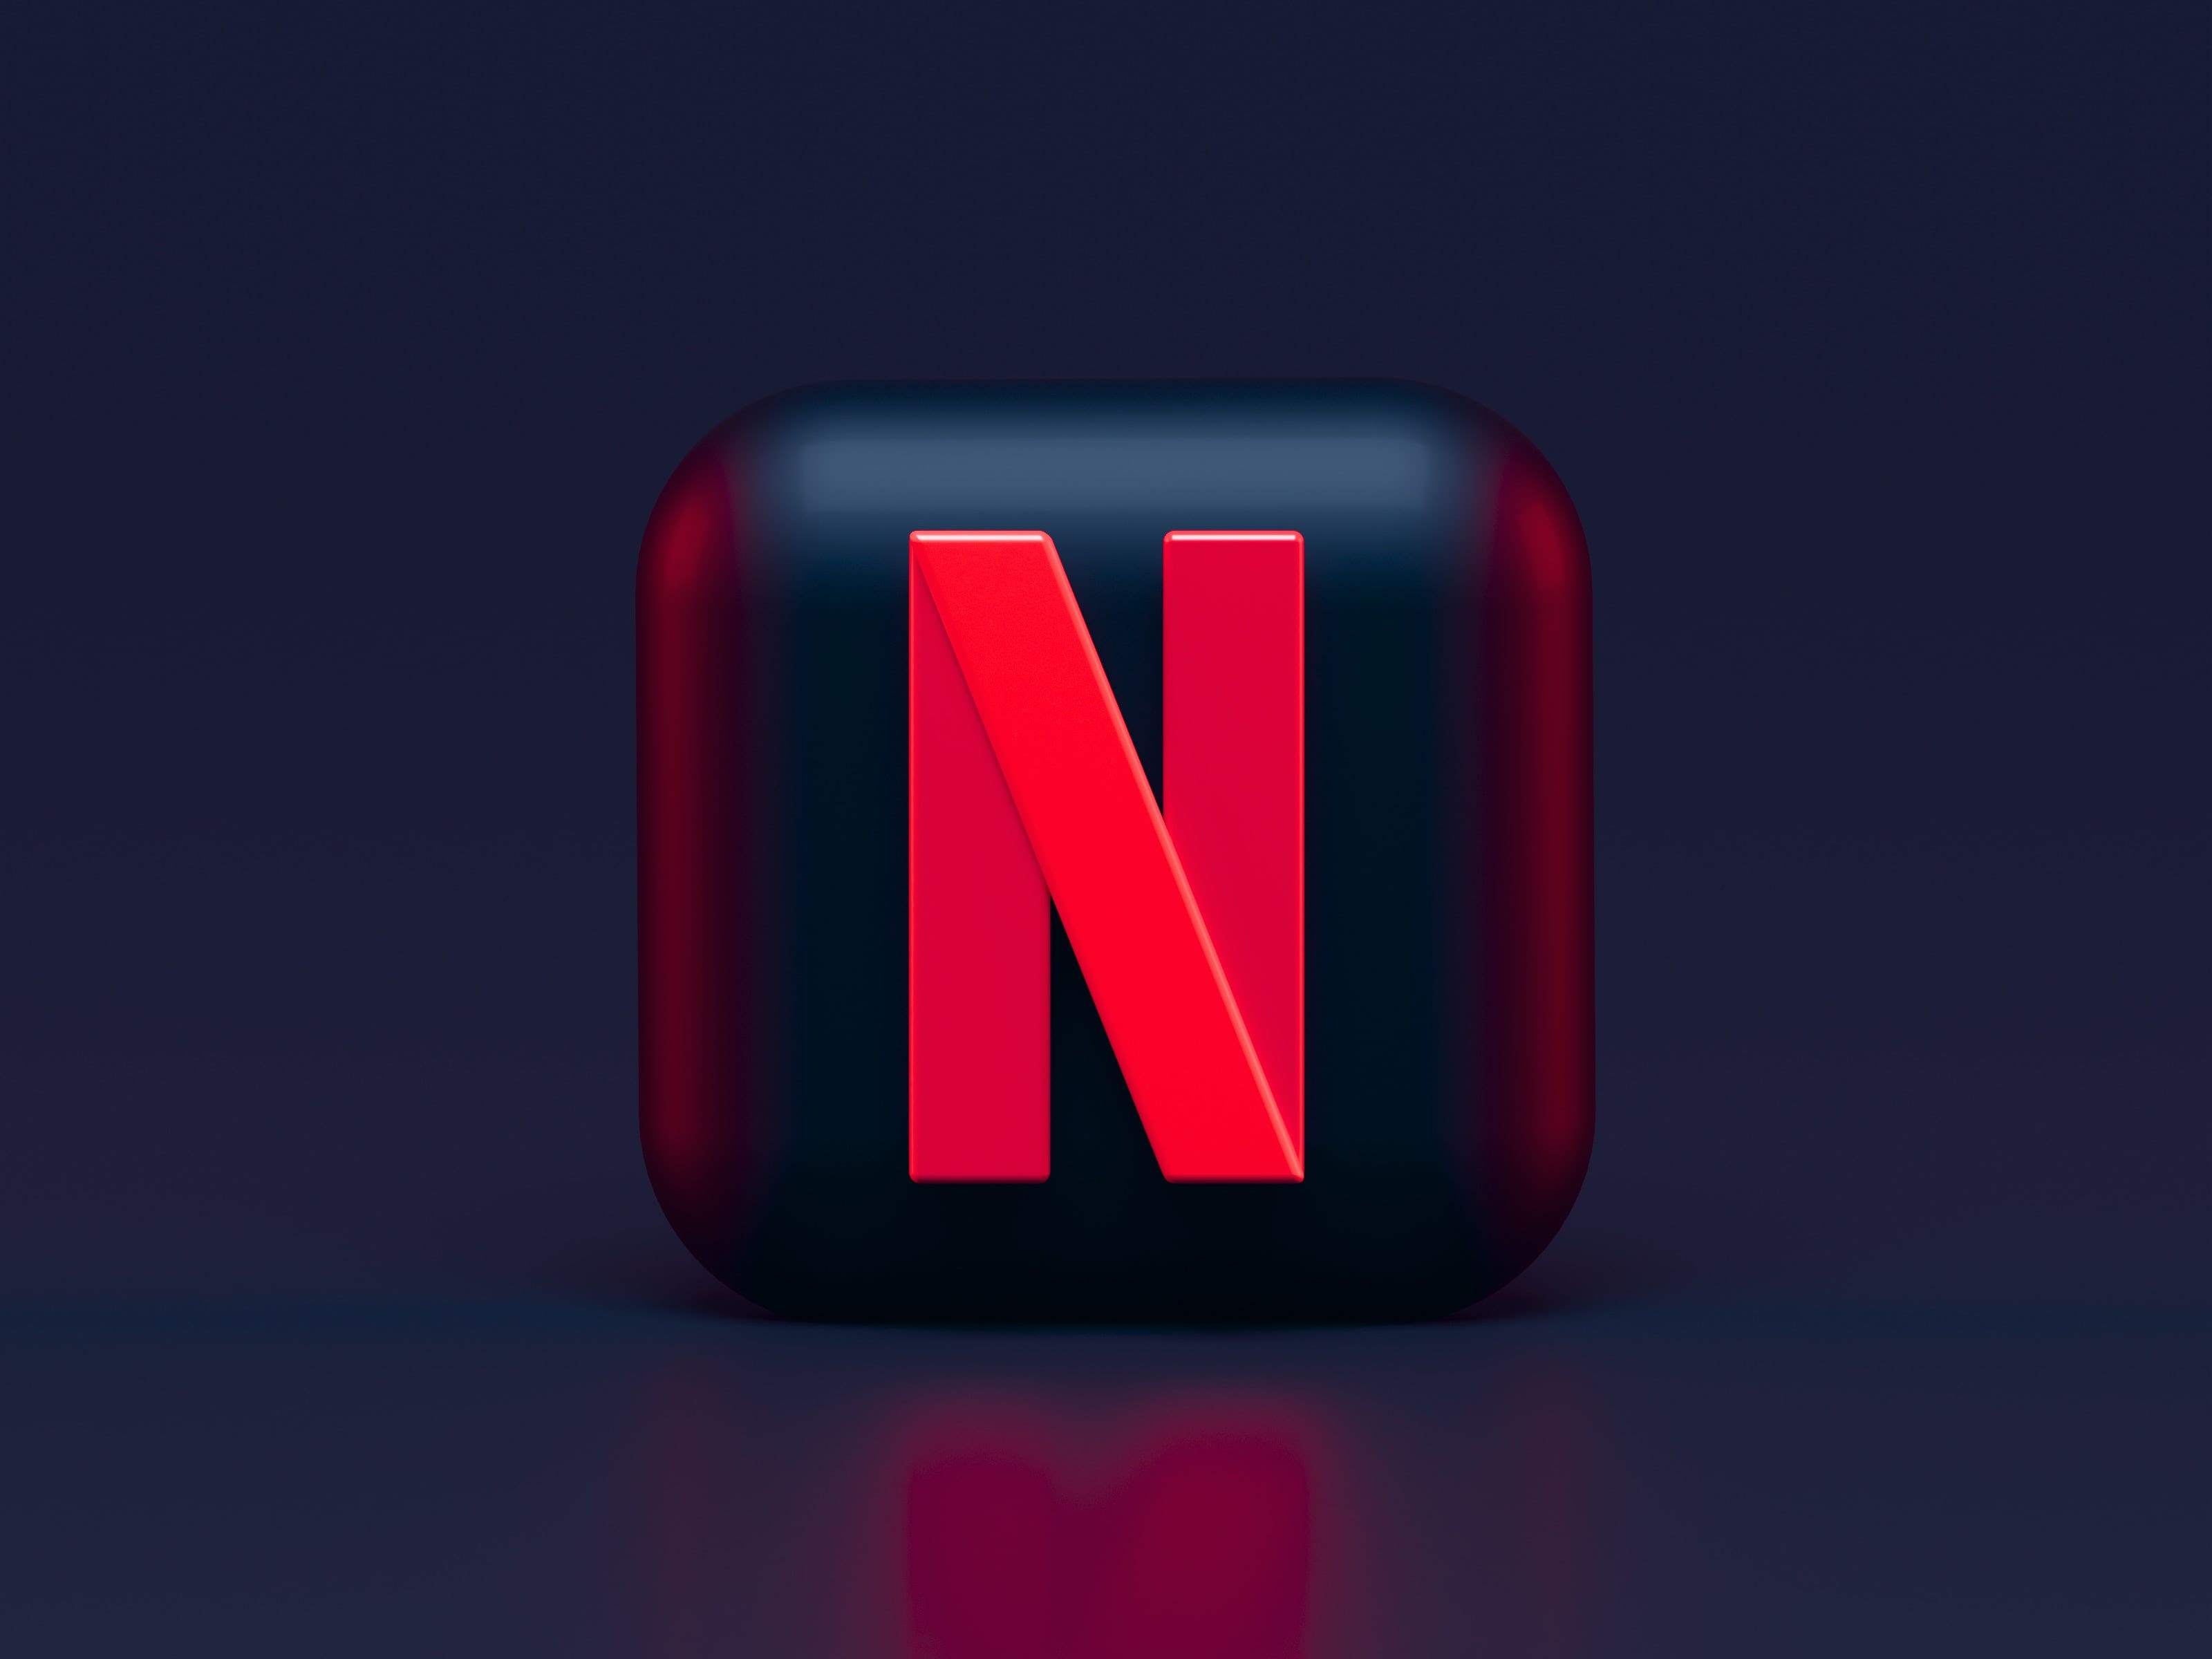 8 Netflix Analysts React To Q2 Earnings Beat, Subscriber Guidance, Ad-Supported Tier